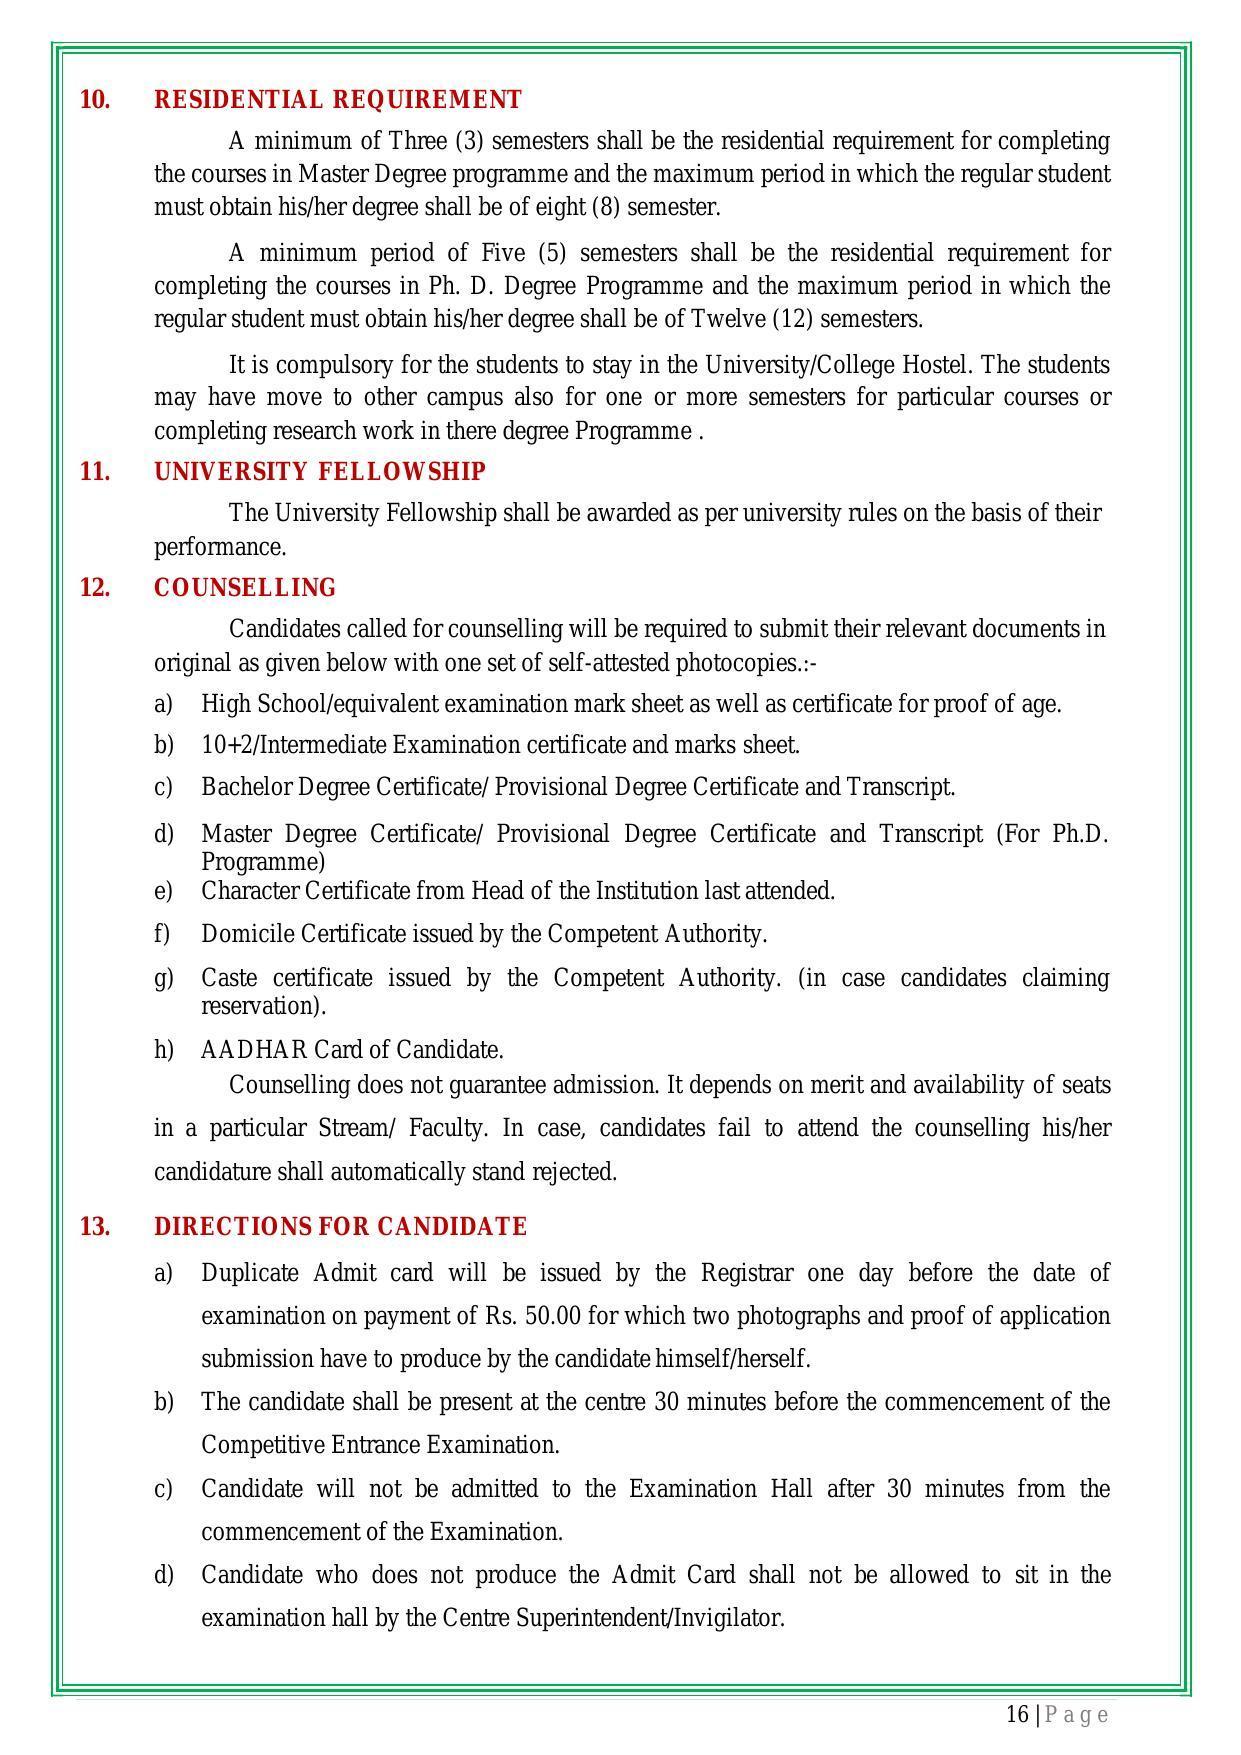 Bihar Agricultural University PG Entrance Exam - Page 17